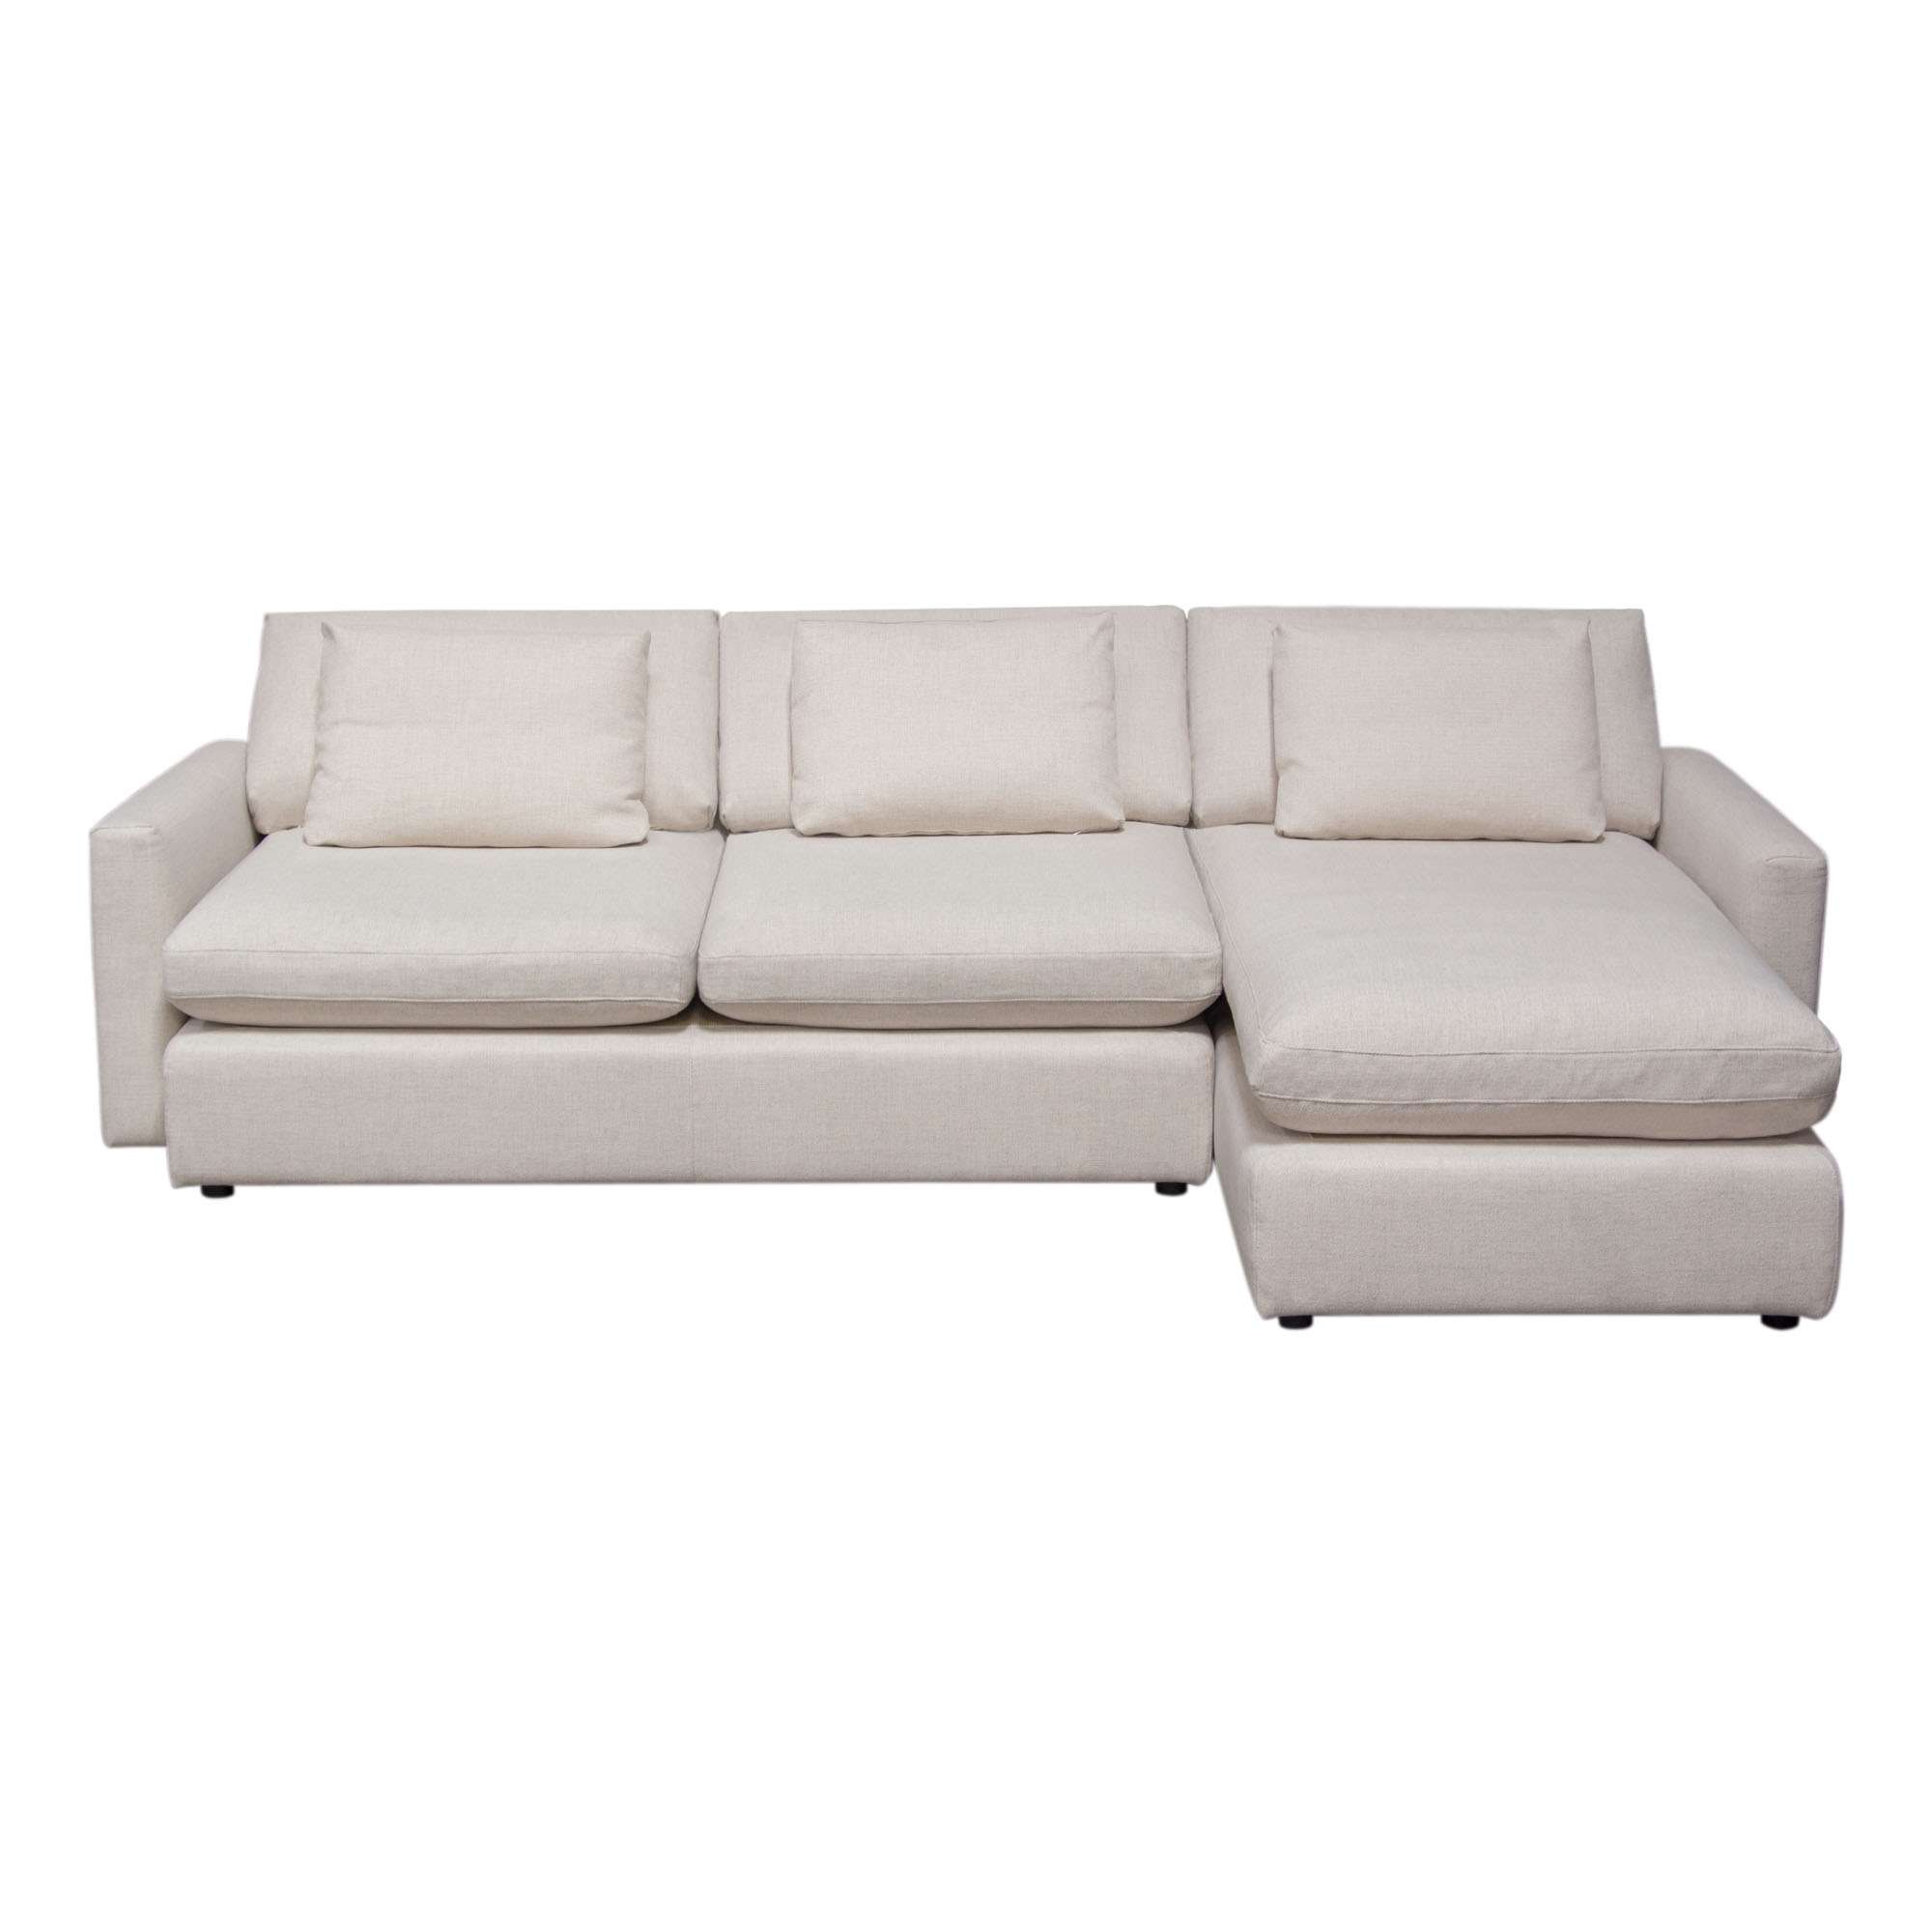 Arcadia 2PC Reversible Chaise Sectional w/ Feather Down Seating in Cream Fabric by Diamond Sofa - Decorian Group